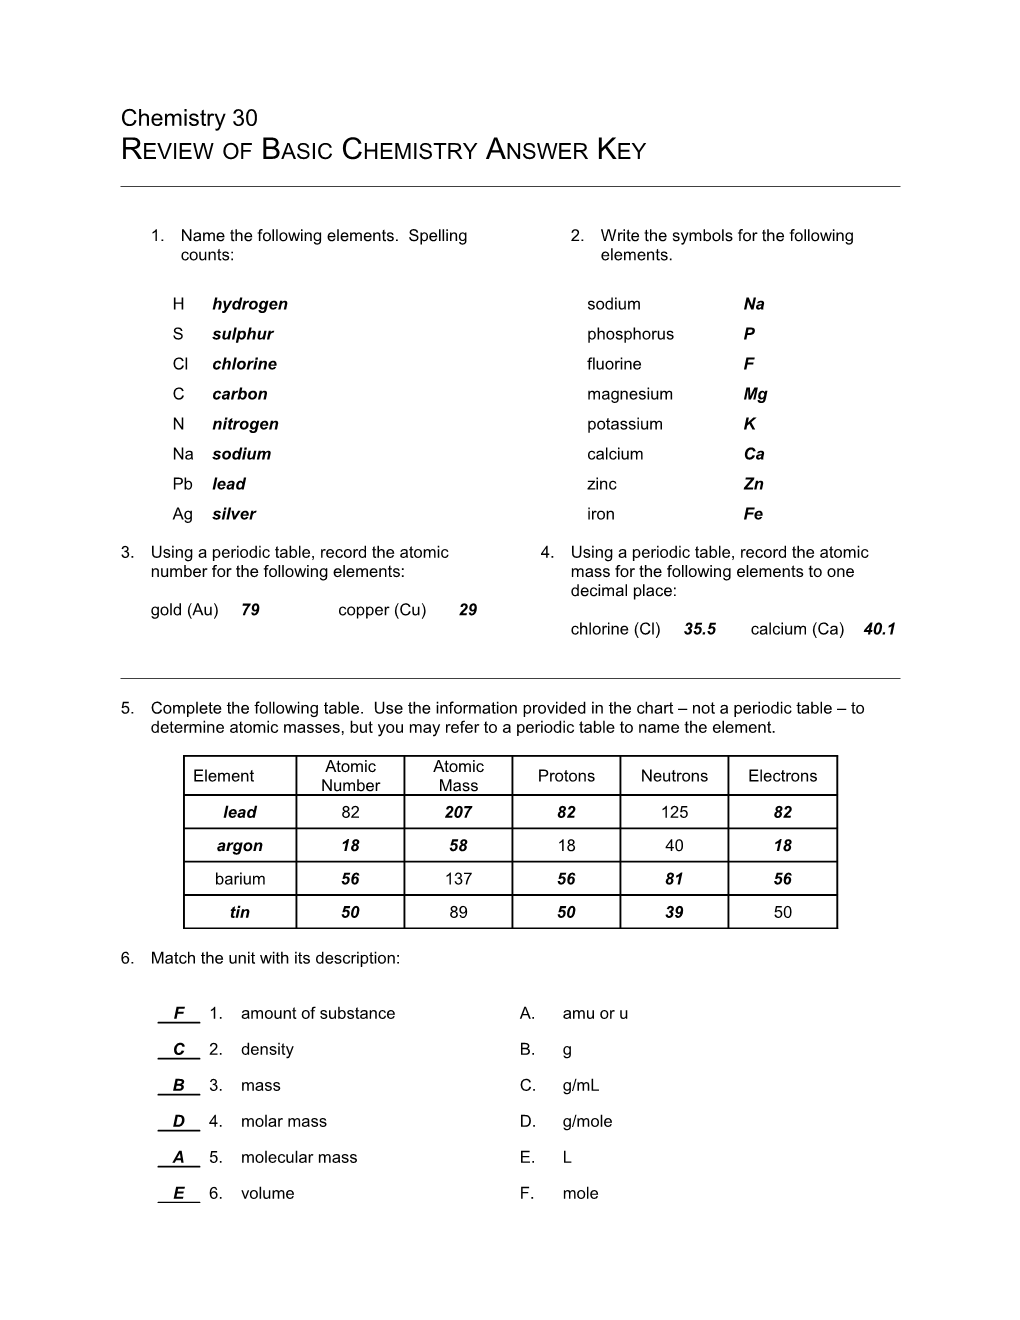 Review of Basic Chemistry Answer Key